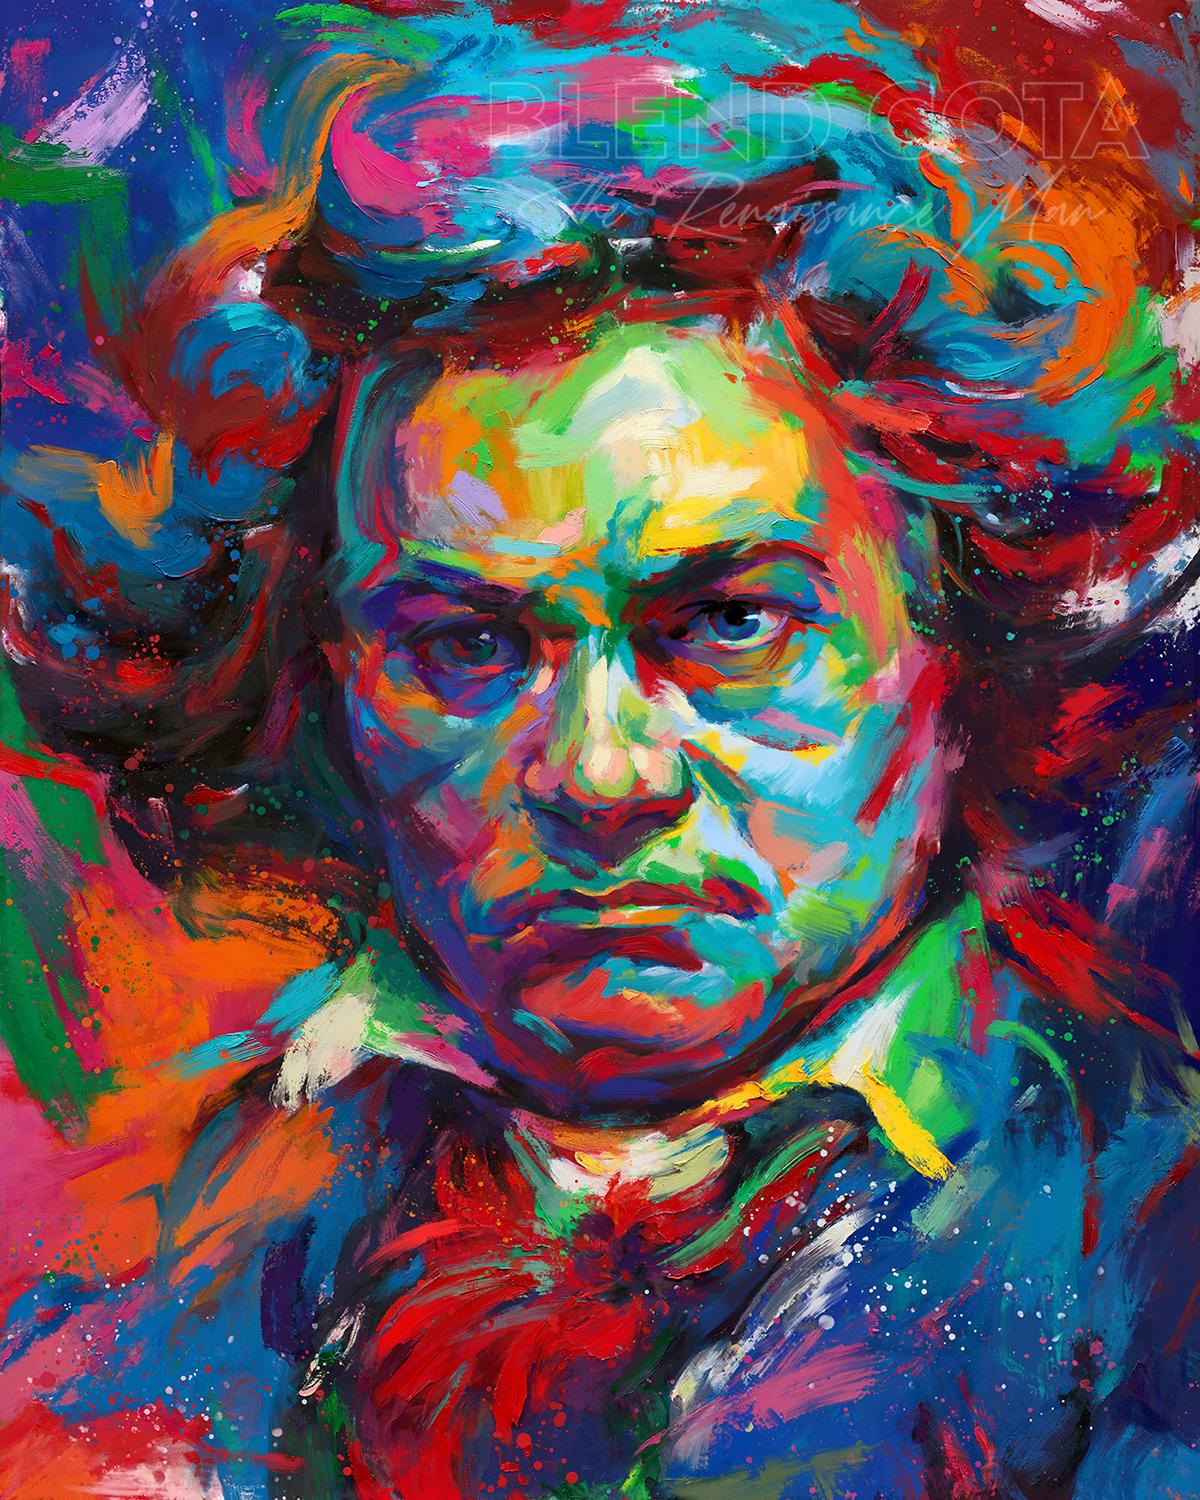 Beethoven - A Symphony of Color (Limited Edition on Metal) - Print by Blend Cota